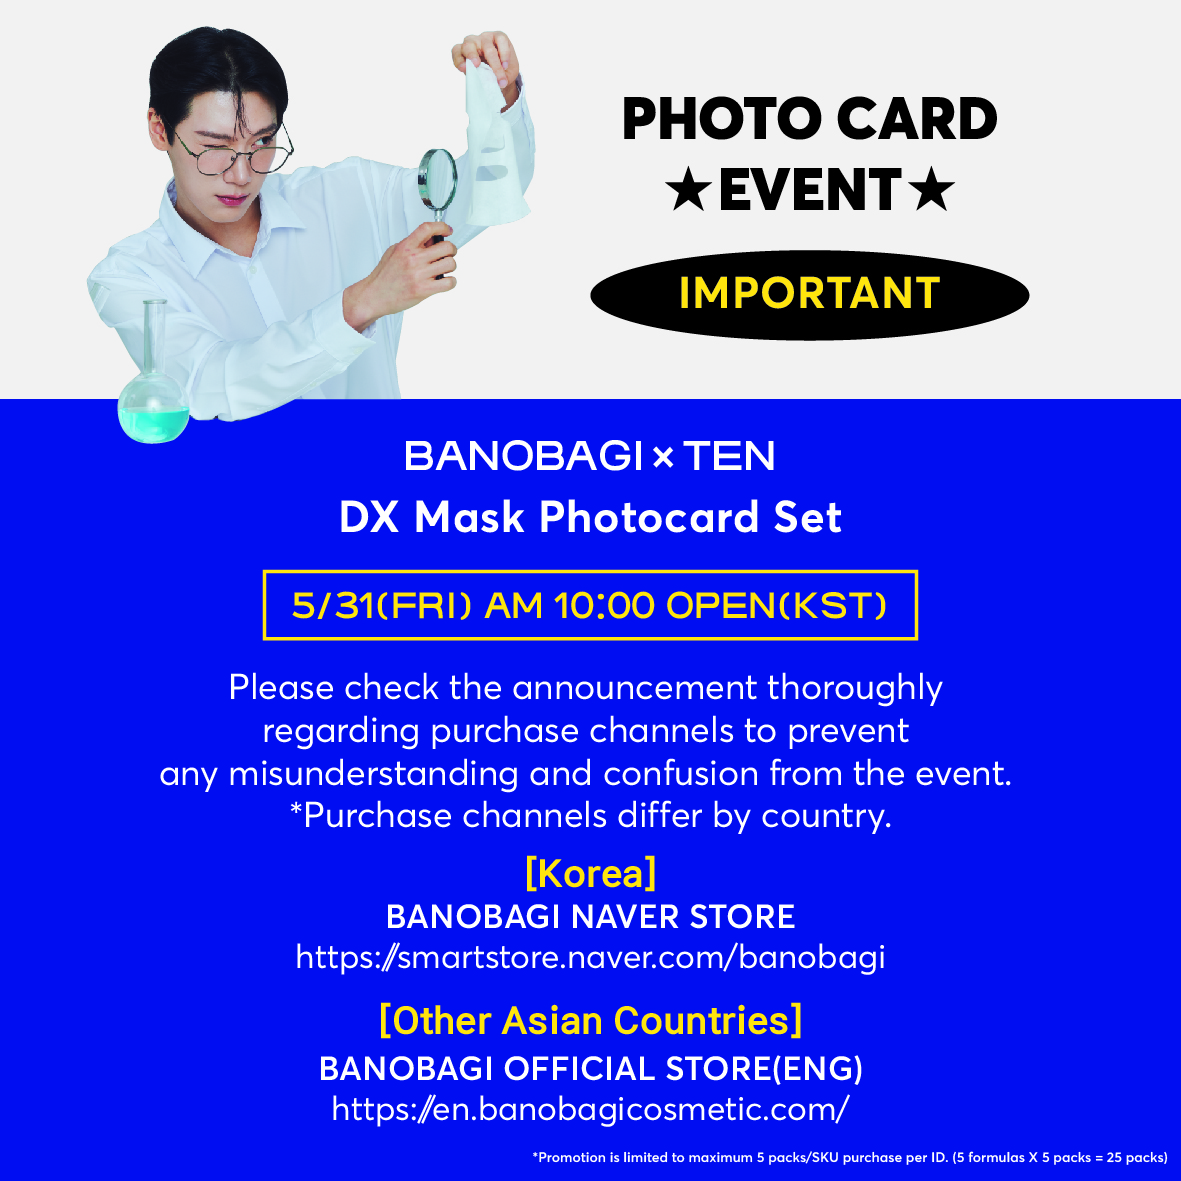 #BANOBAGIXTEN [Announcement of the 𝙋𝙃𝙊𝙏𝙊𝘾𝘼𝙍𝘿 𝙀𝙑𝙀𝙉𝙏 purchase channel] ✅ Schedule: 5/31 (Friday) 10AM (KST) until sell out ✅活动时间：5/31（星期五）上午10:00（韩国时间）至售完为止 👉 Make sure to check Terms & Conditions in the event page!